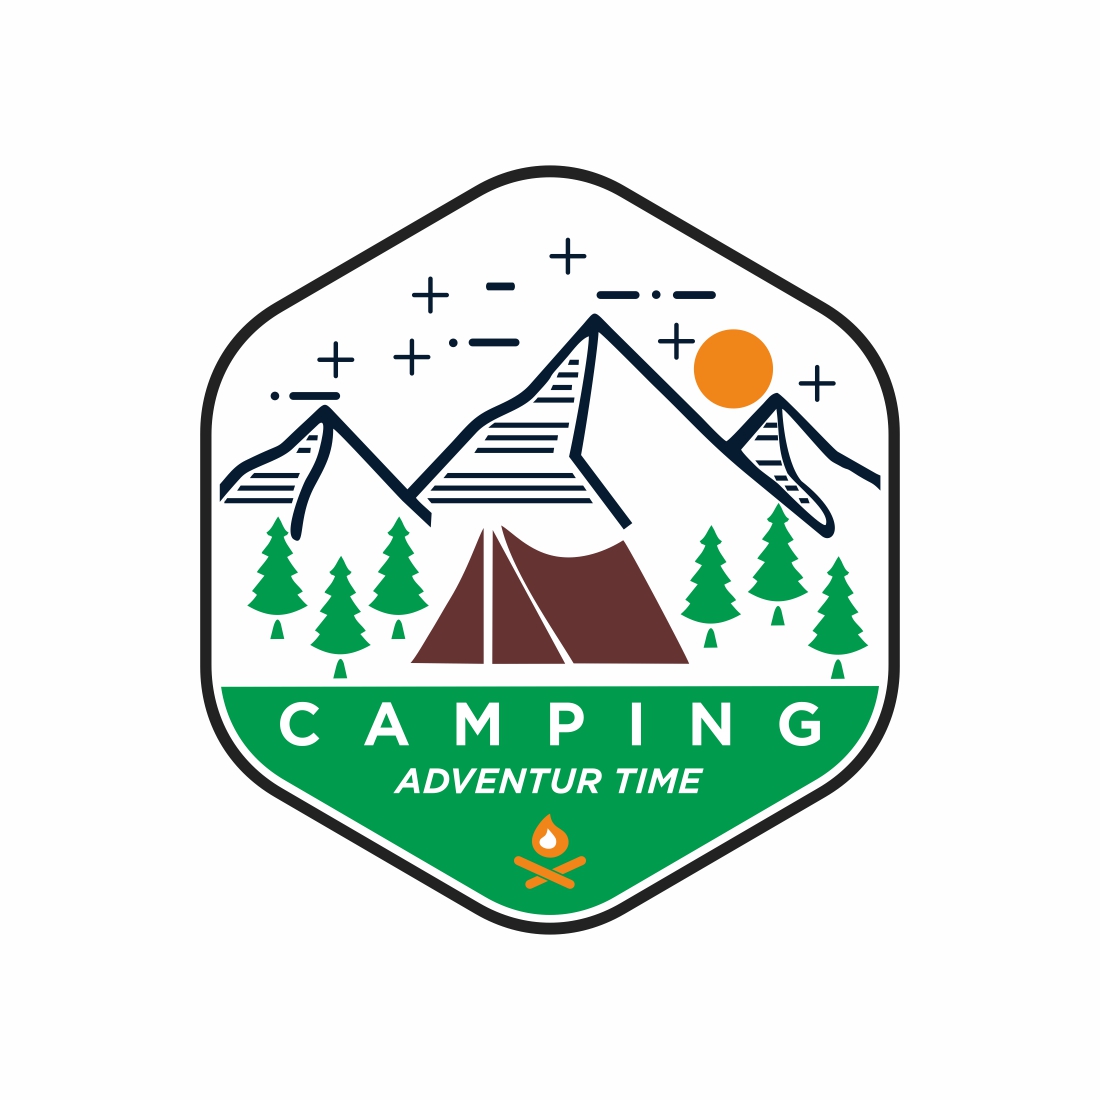 Badge emblem outdoor adventure camping logo illustrations template cover image.